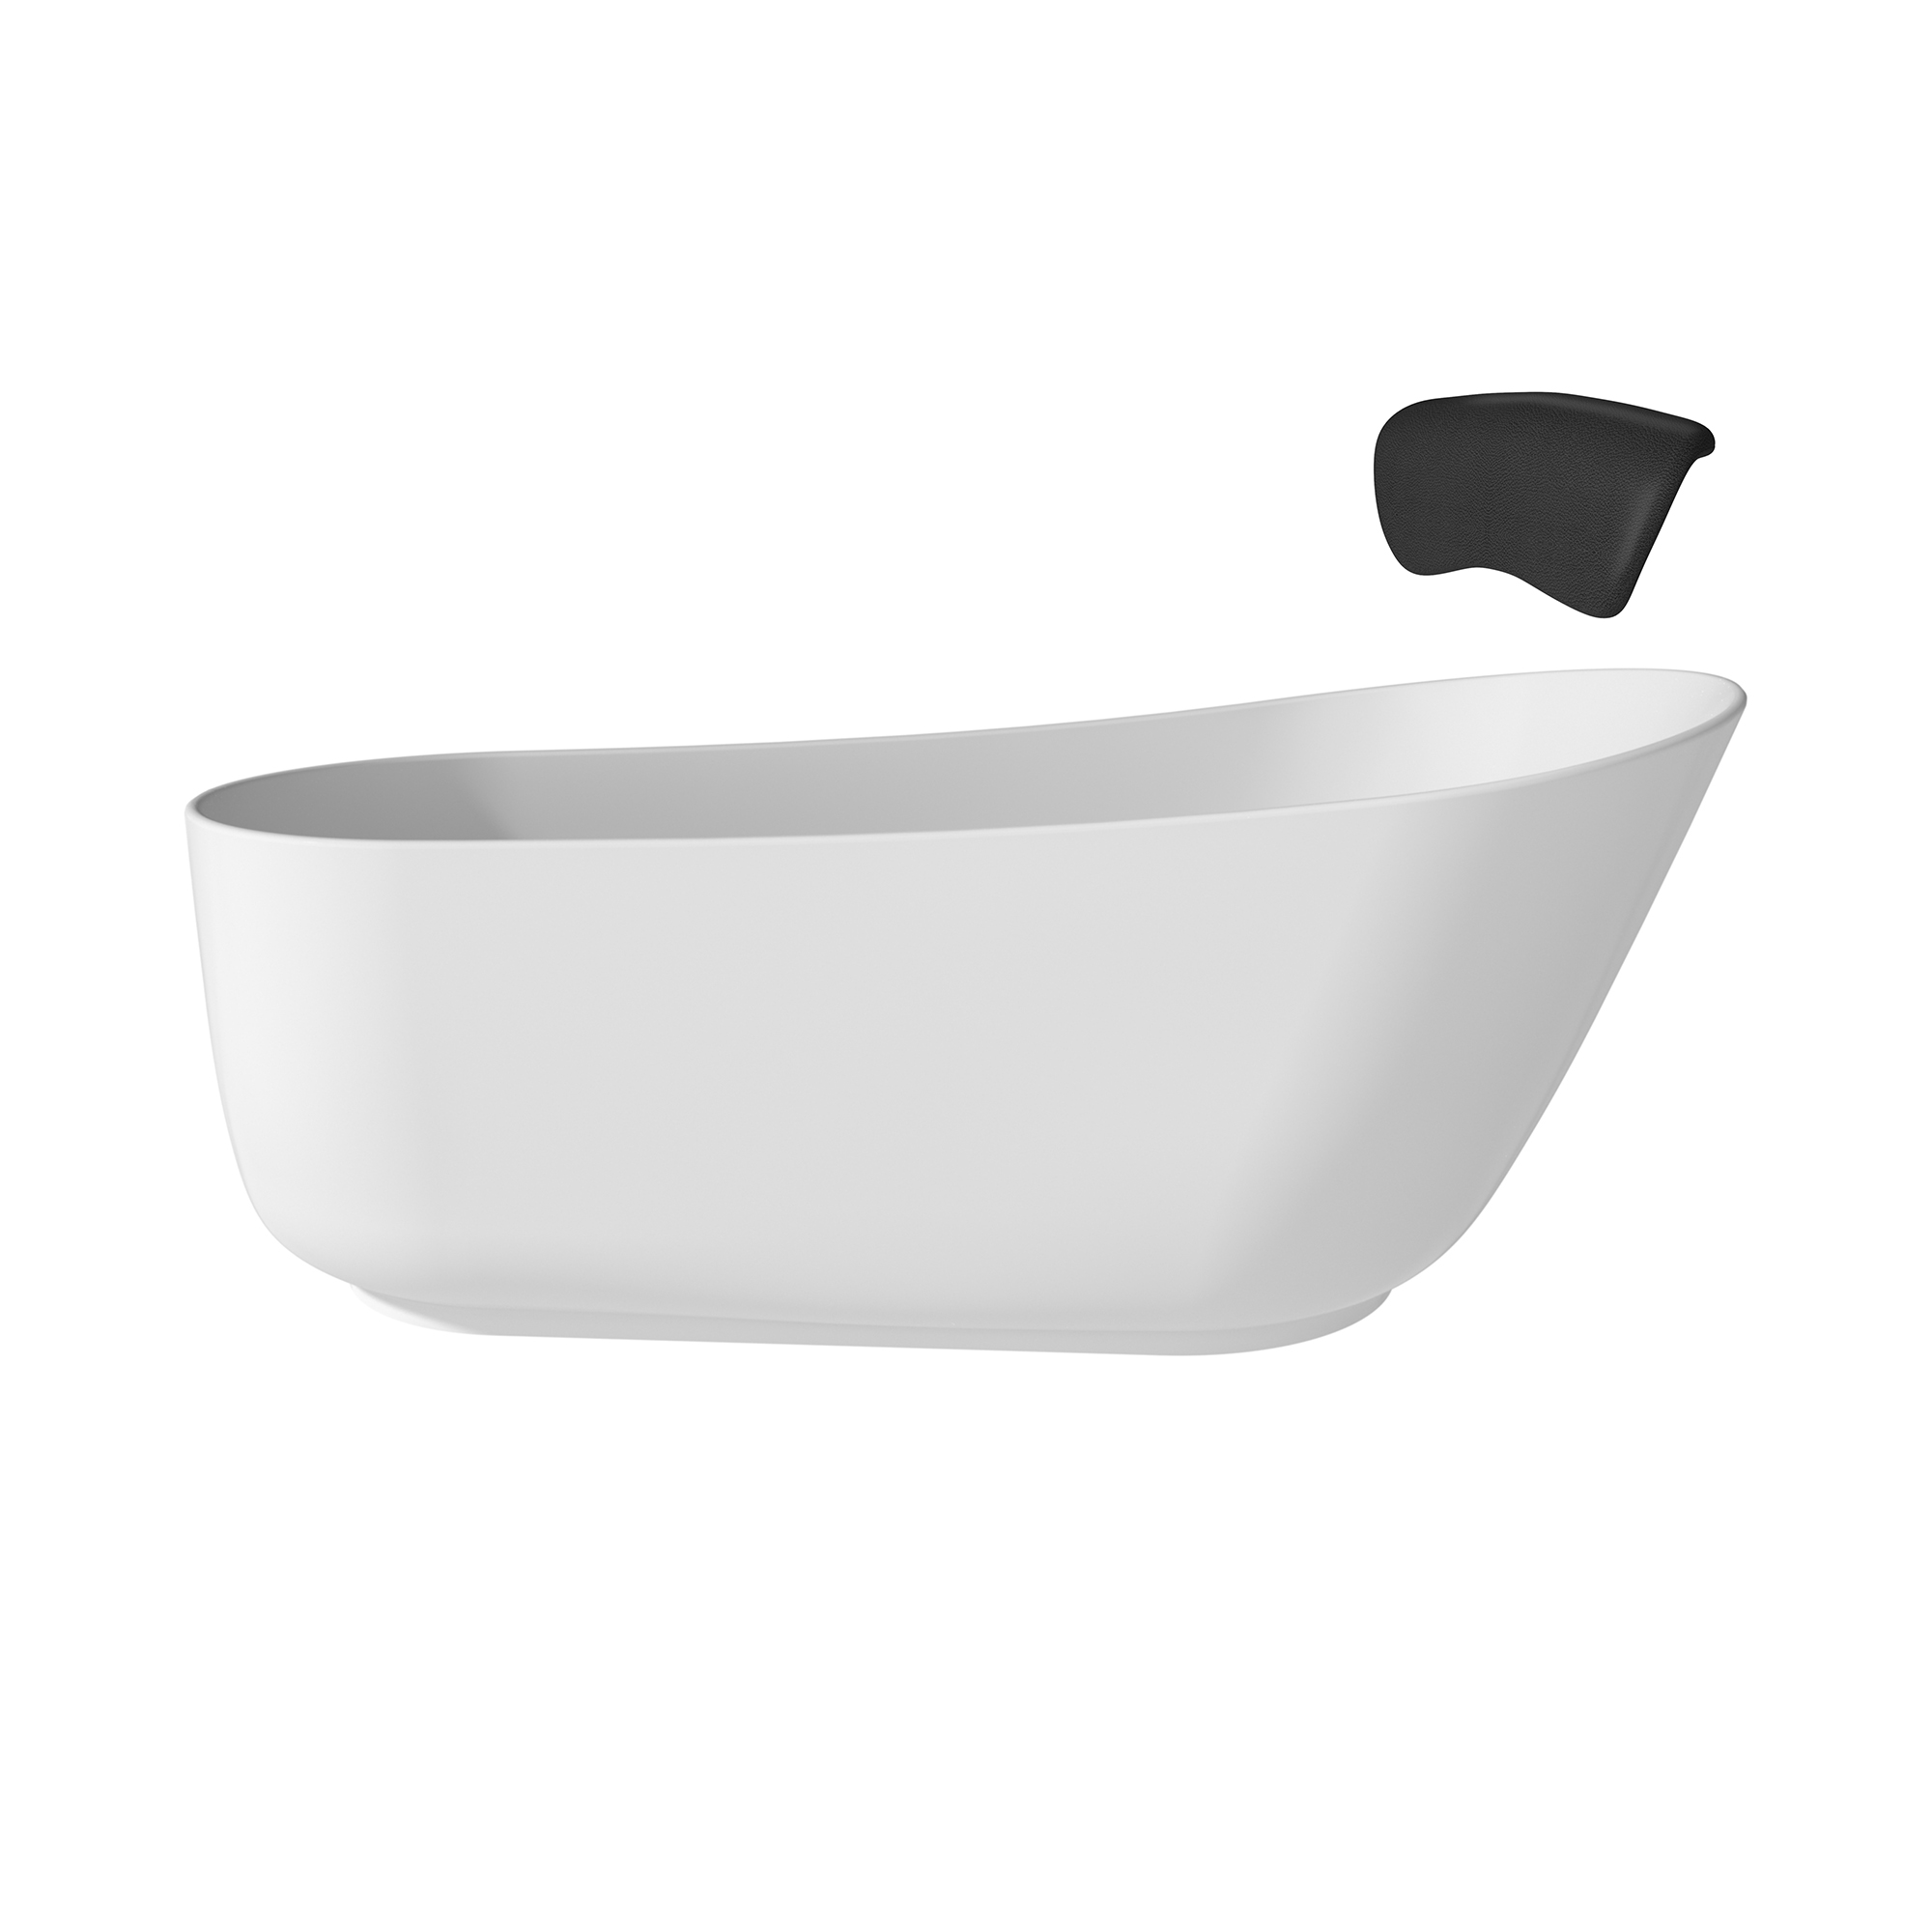 59/67" Matte Color Tubs Stone Resin Bathtubs, Adult Freestanding Tub with Cushions, Classic Stand-Alone Elegance, Durable and Easy to Maintain, with Free to Ship and Varied Length Options